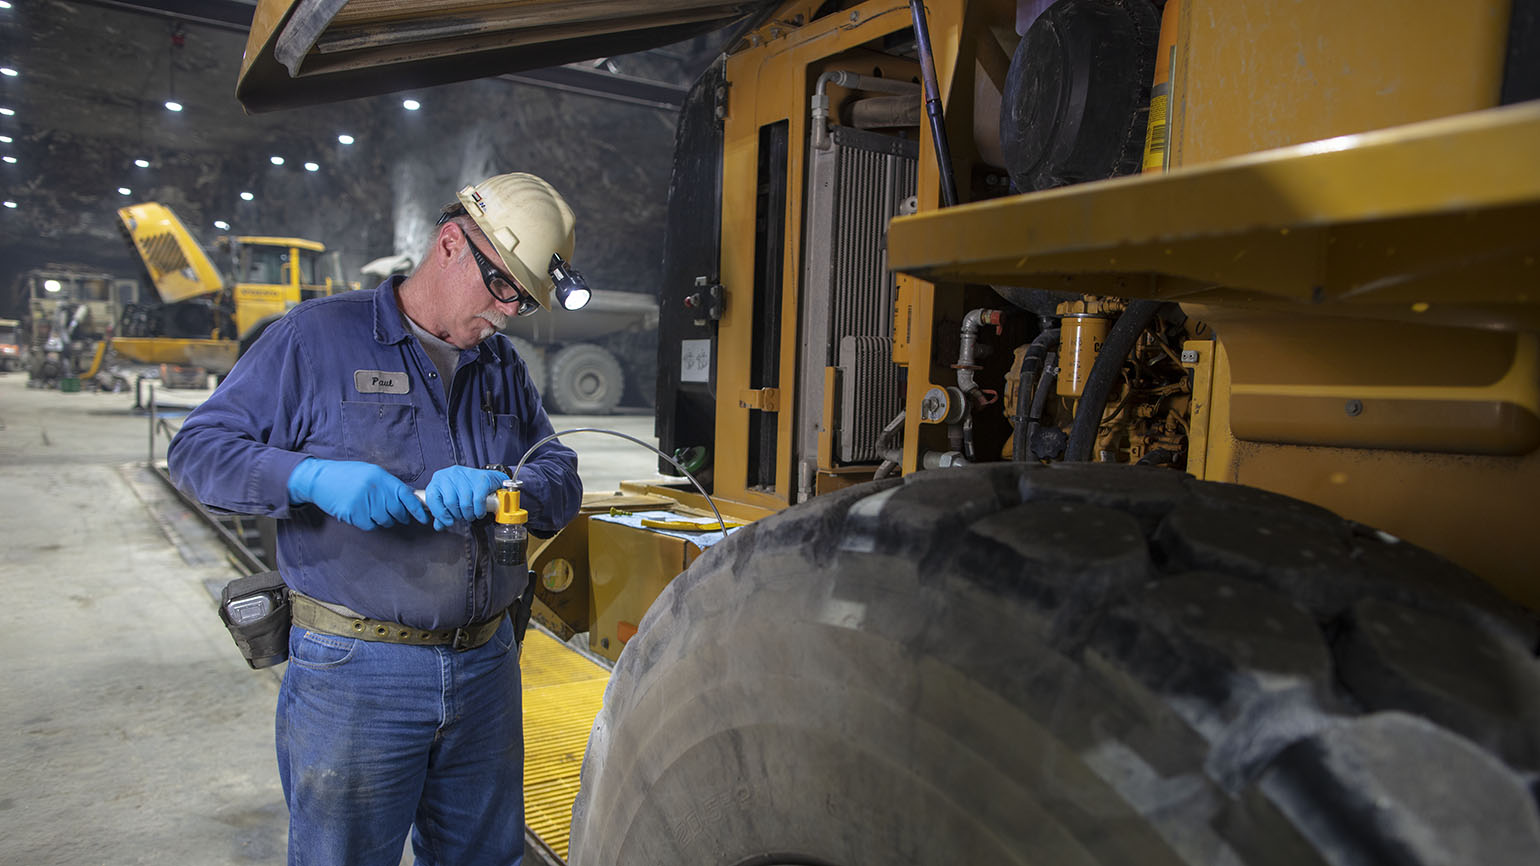 Maintenance personnel checks the lubricant of a haul truck as part of a maintenance program.